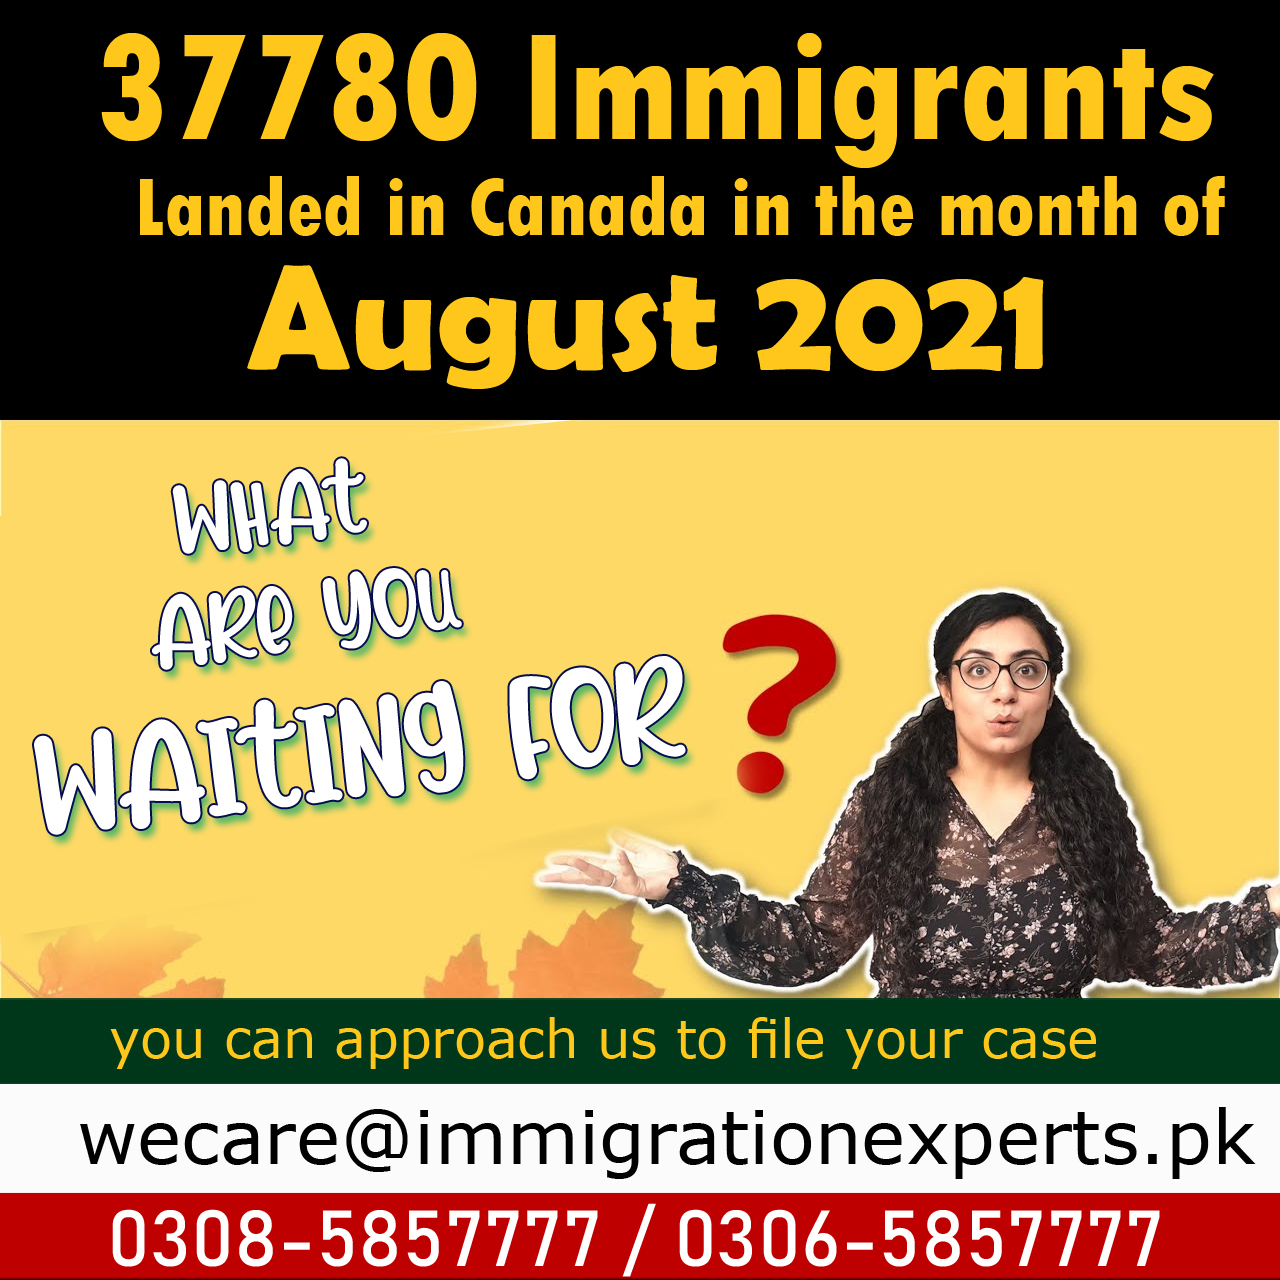 Canada invites almost 38000 immigrants in the month of August 2021